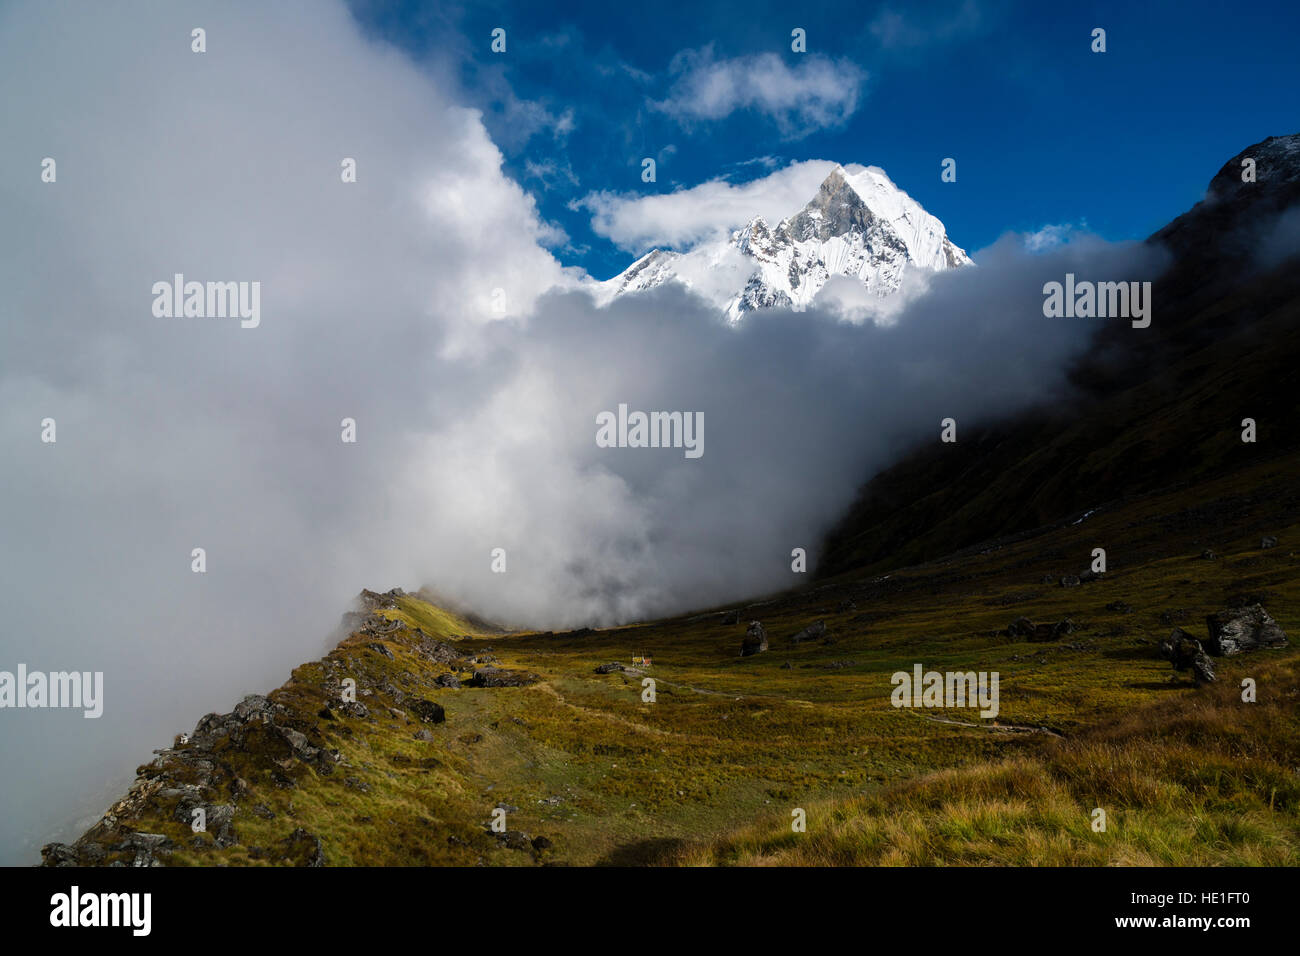 View on the summit of the mountain Machapuchare, partly covered by monsoon clouds Stock Photo